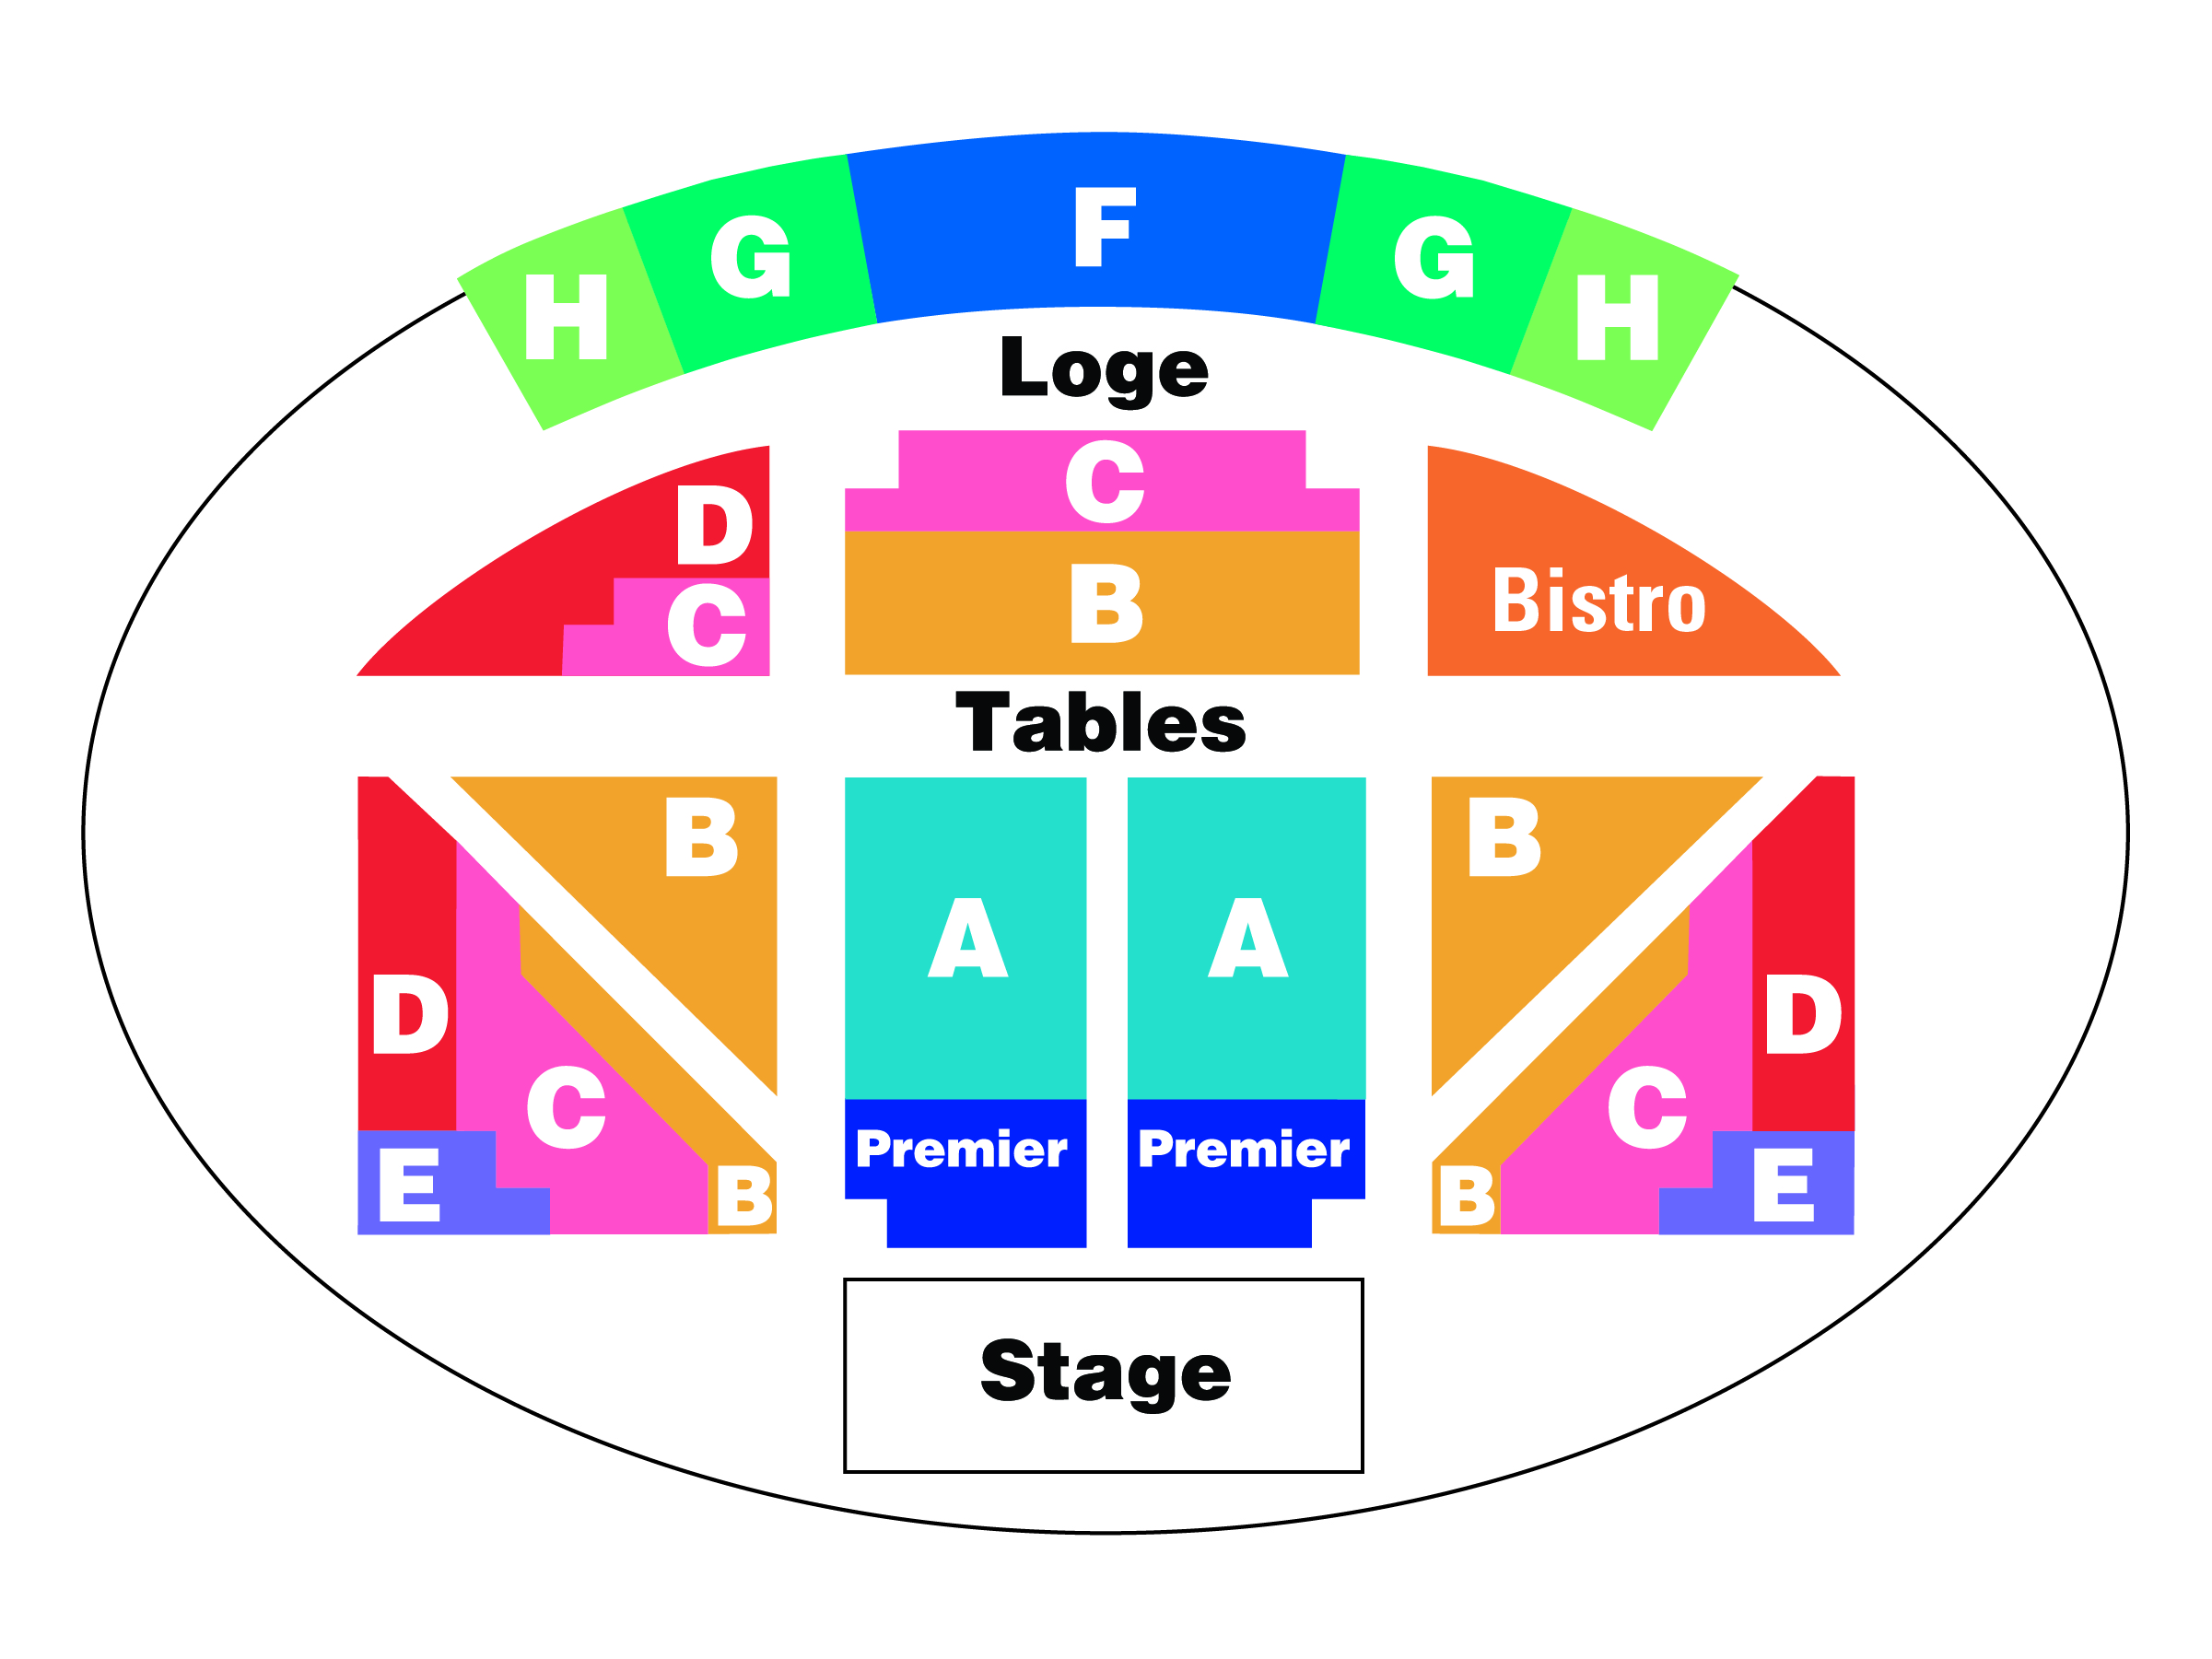 Long Beach Sports Arena Seating Chart